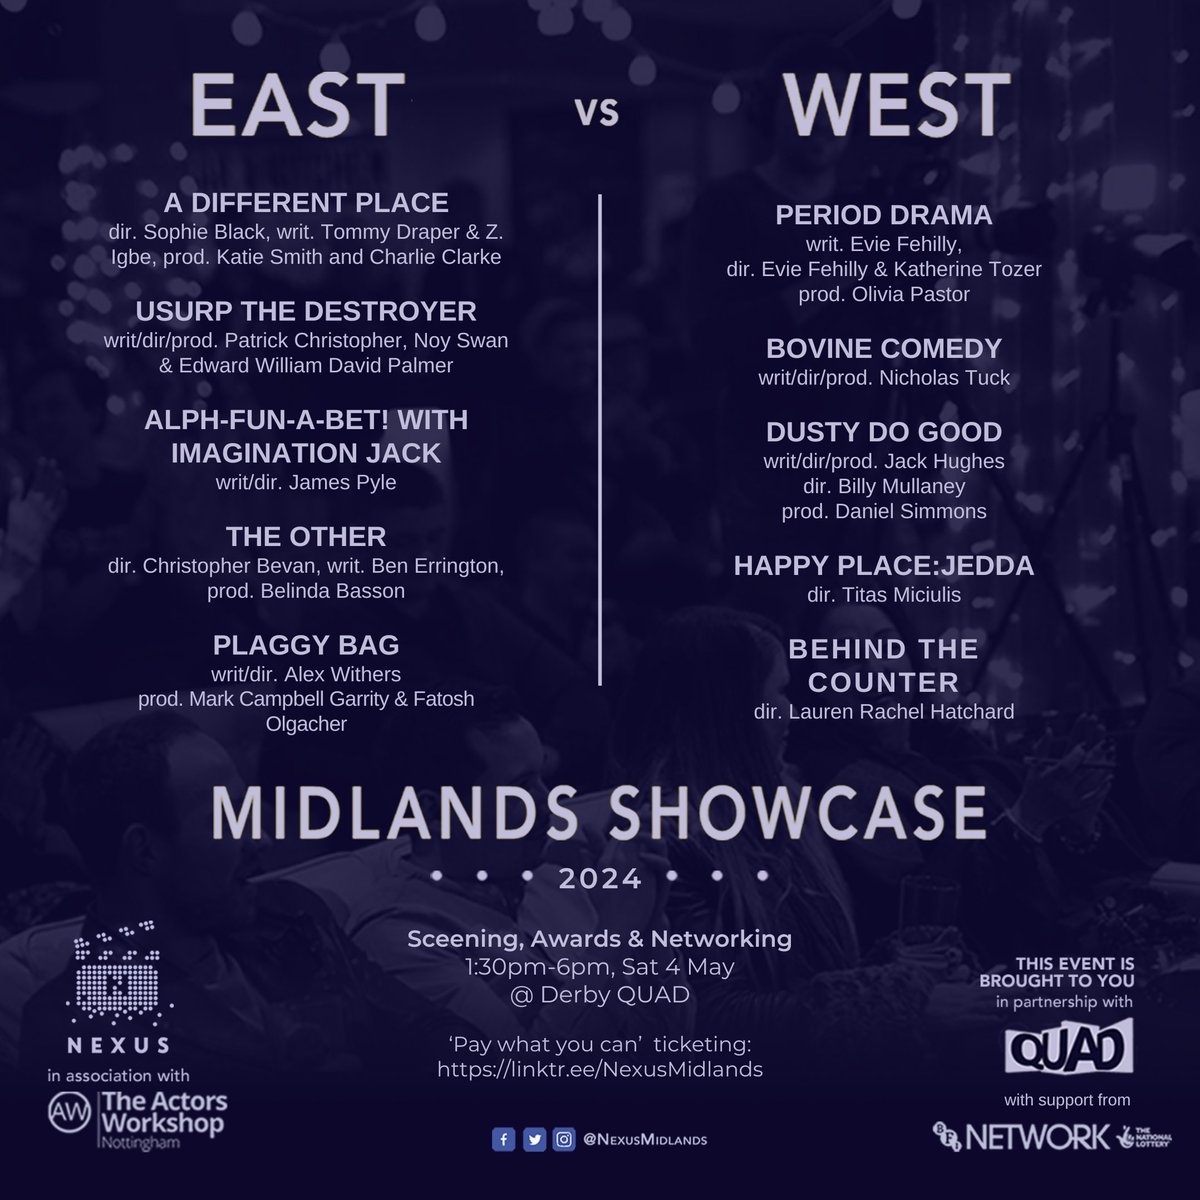 And we have our lineup! Tickets are now on sale - grab one now and come down to Derby QUAD on 4 May to support your region!! This event is brought to you in partnership with @derbyquad and supported by @bfinetwork linktr.ee/NexusMidlands for tickets!